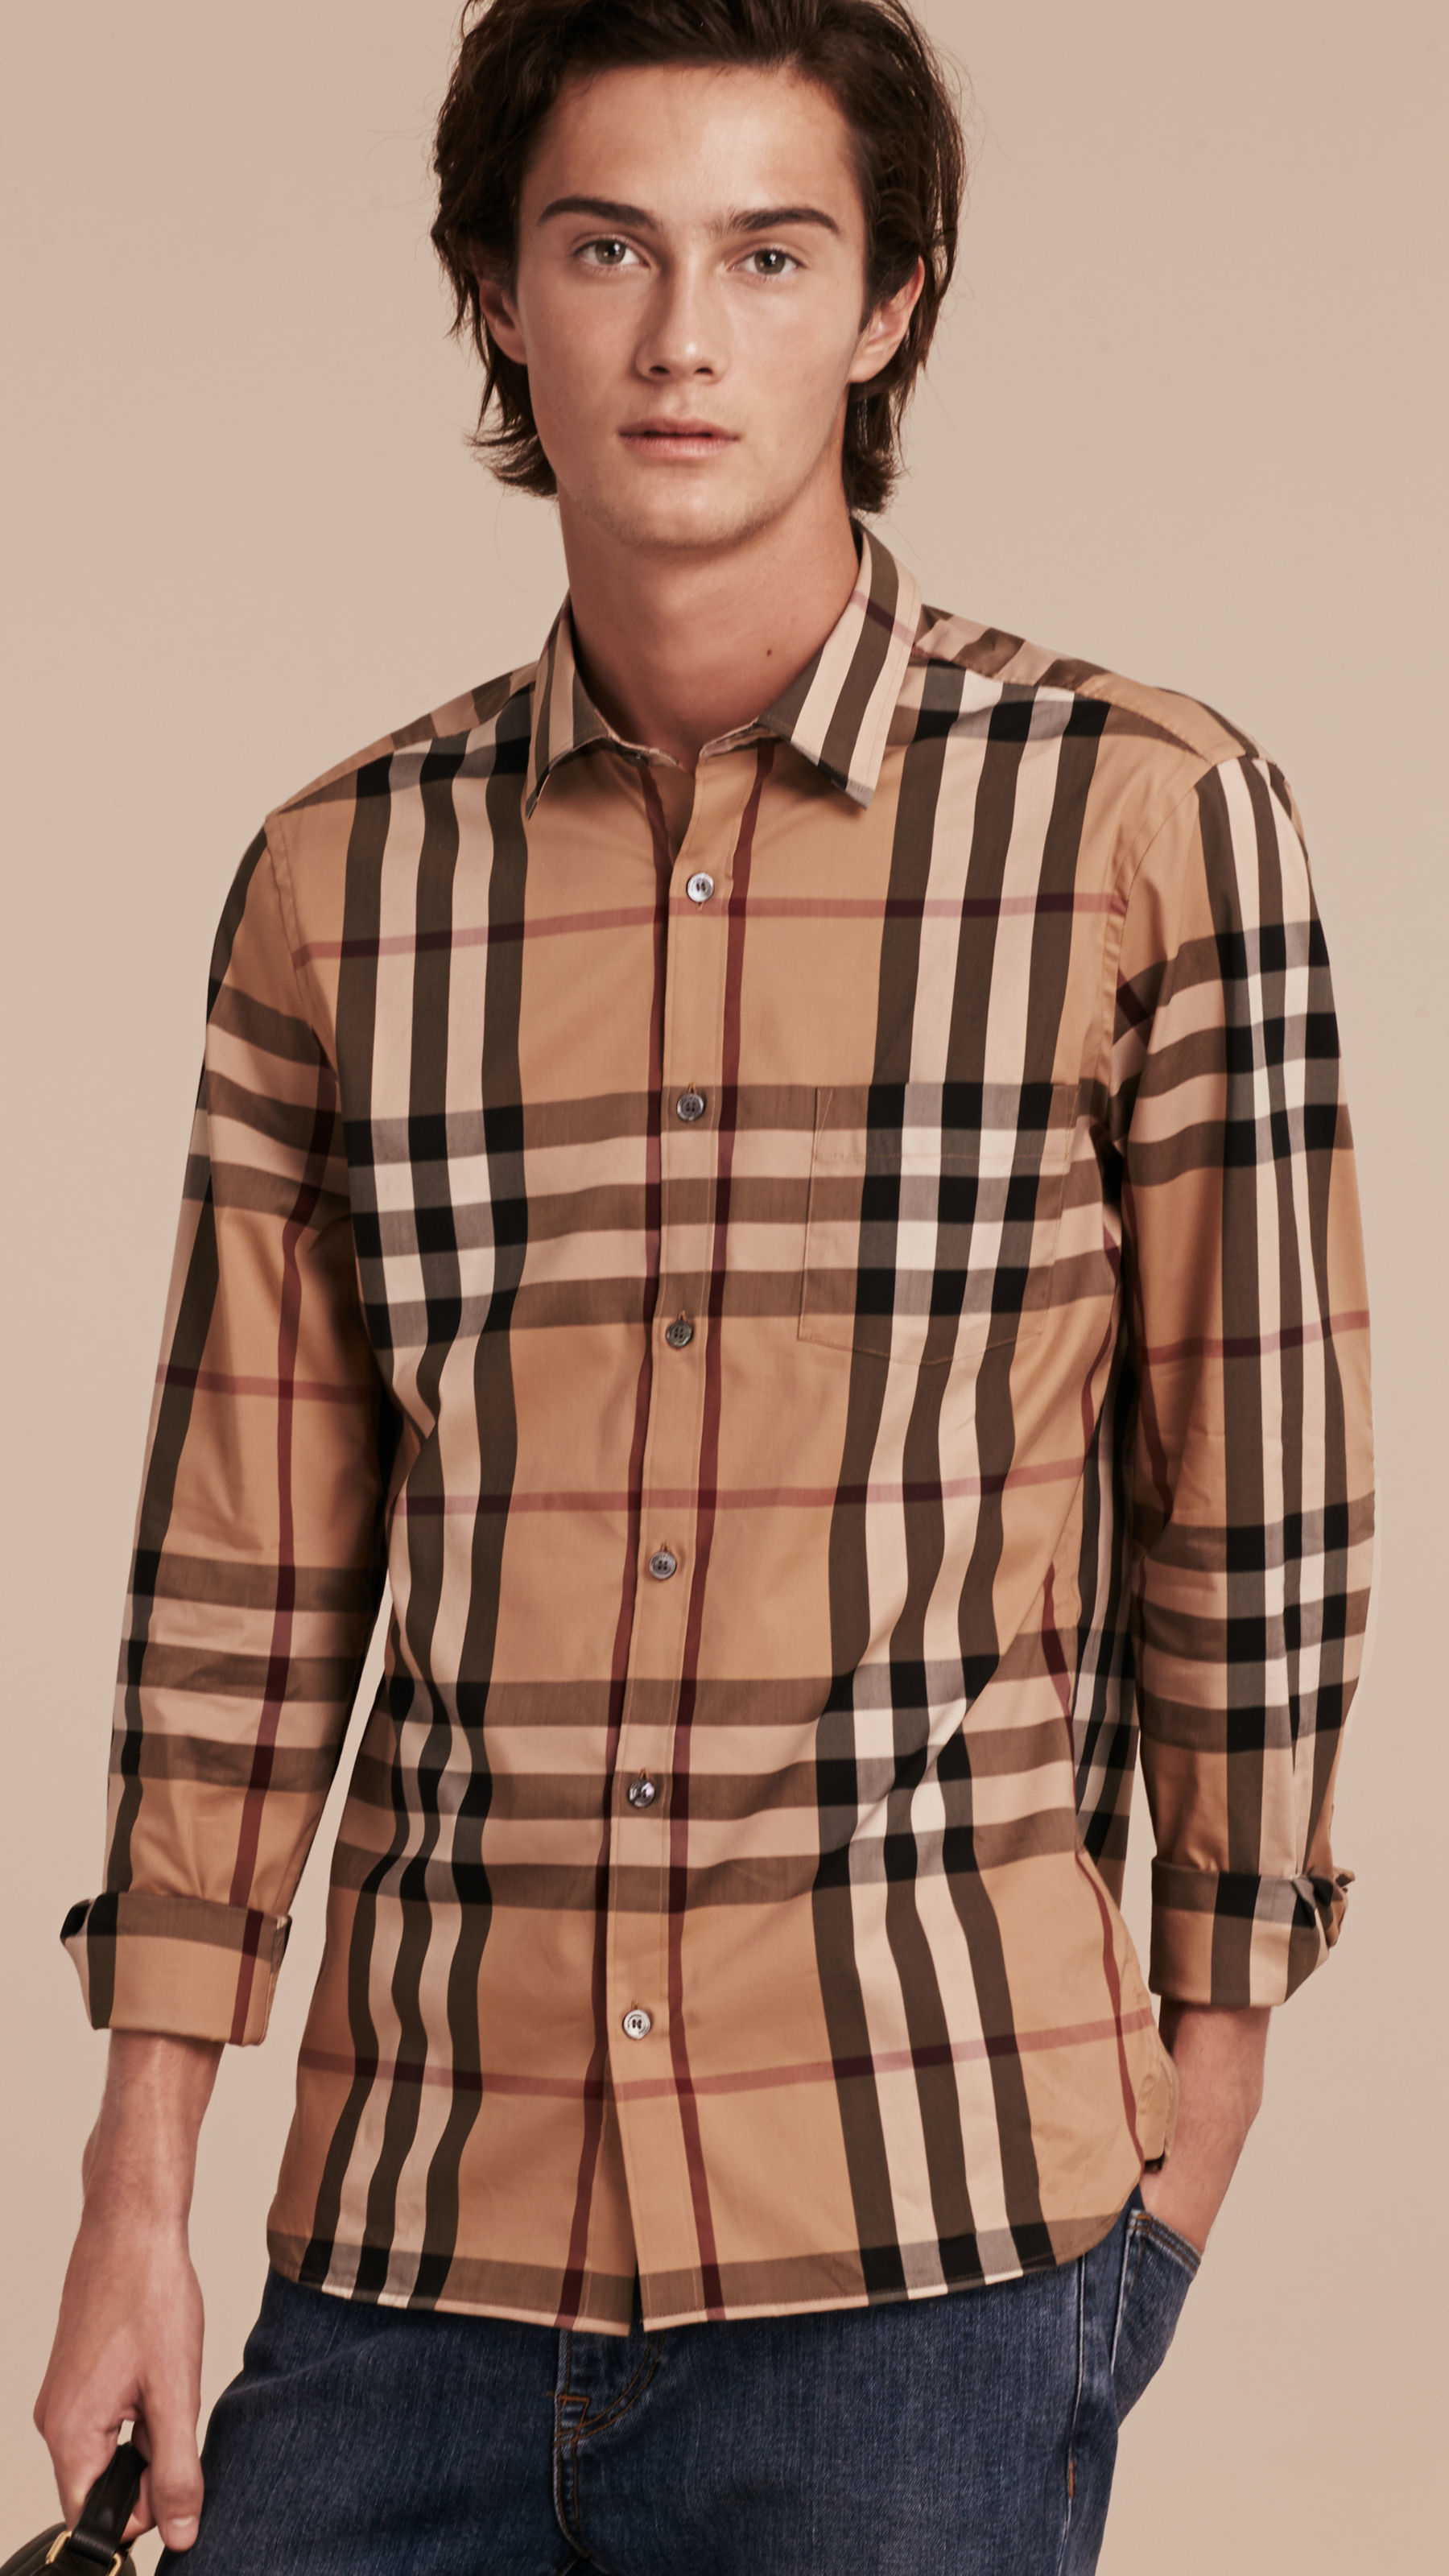 Lyst - Burberry Check Stretch Cotton Shirt Camel in Brown for Men